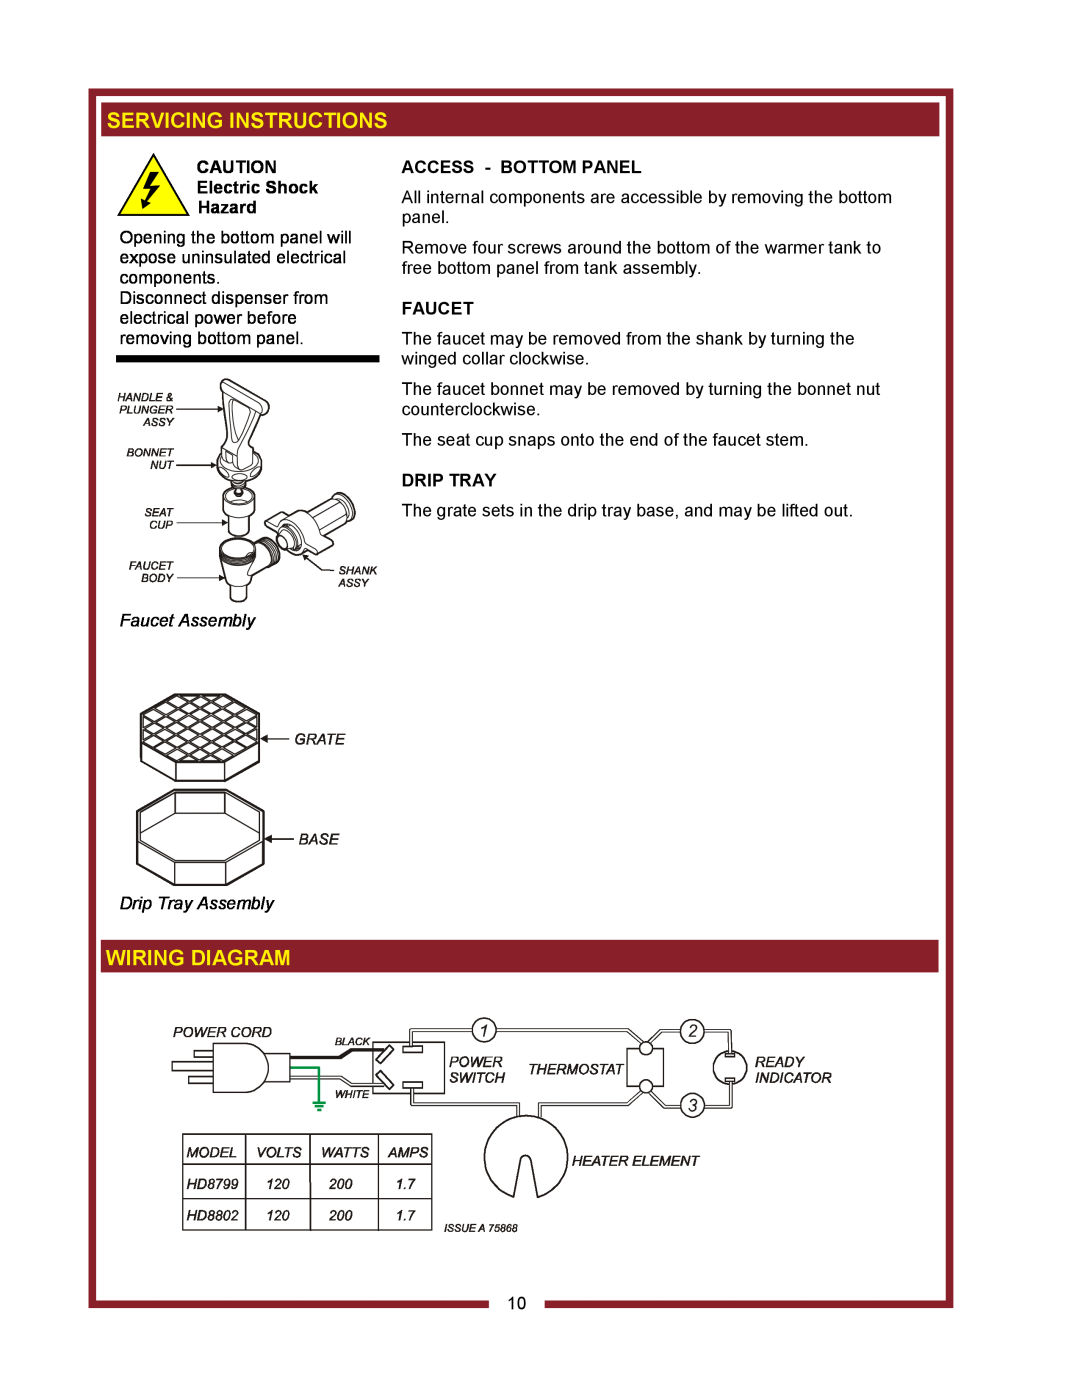 Bloomfield HD8799, HD8802 owner manual Servicing Instructions, Wiring Diagram, Faucet Assembly Drip Tray Assembly 